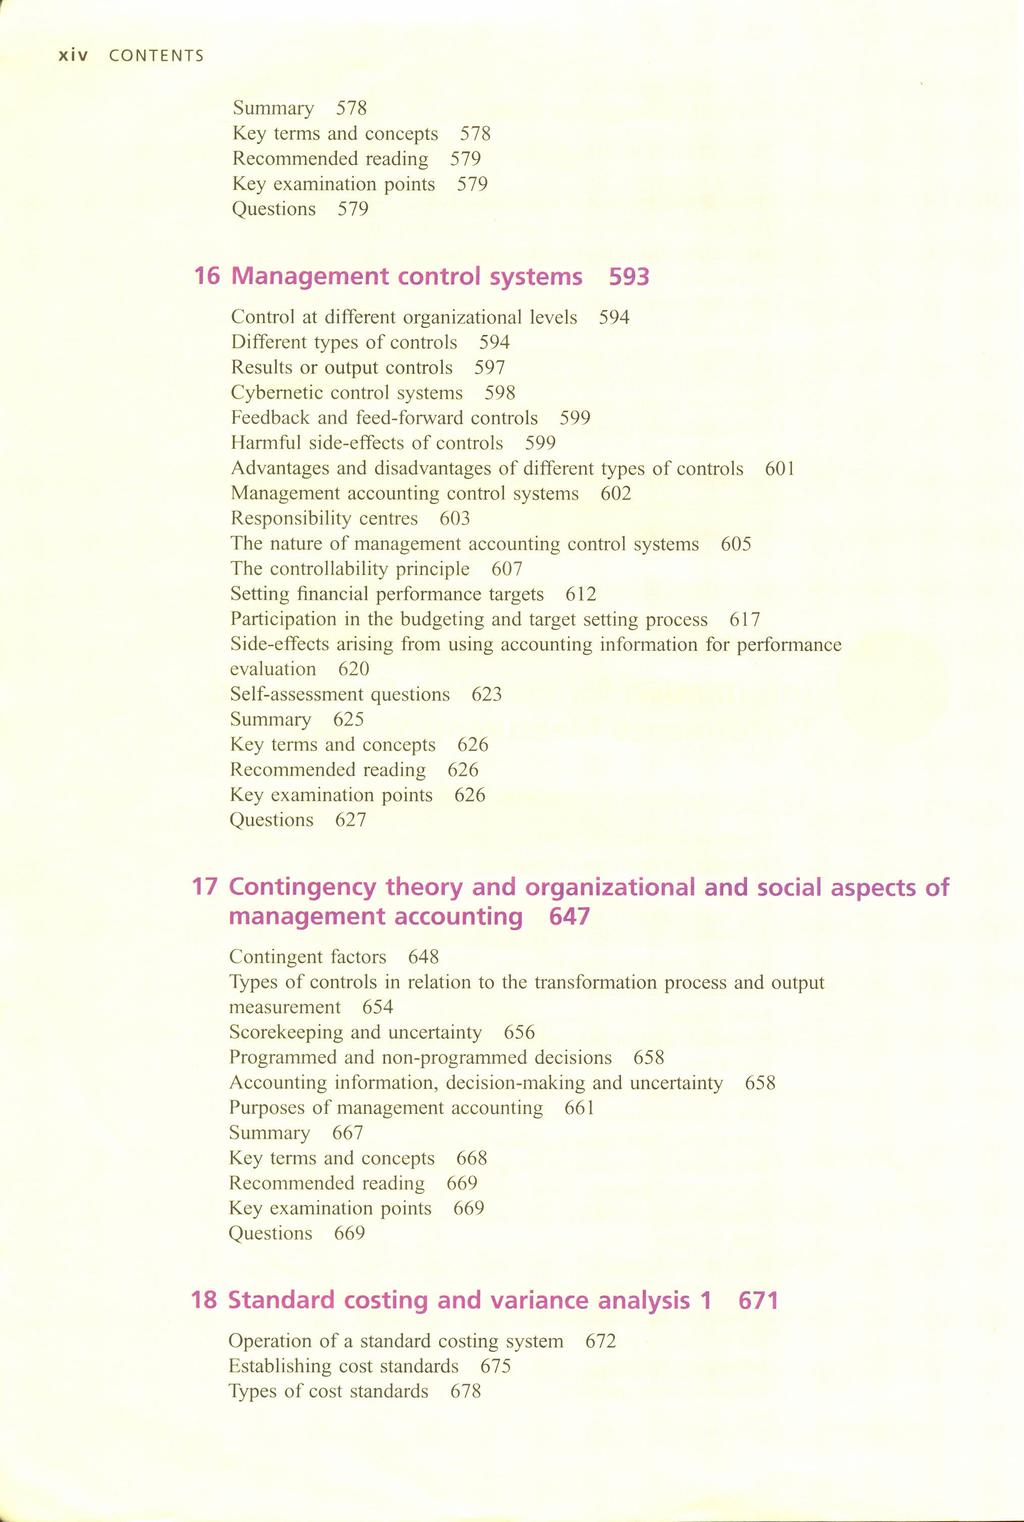 xiv CONTENTS Summary 578 Key terms and concepts 578 Recommended reading 579 Key examination points 579 Questions 579 16 Management control systems 593 Contrai at different organizational levels 594